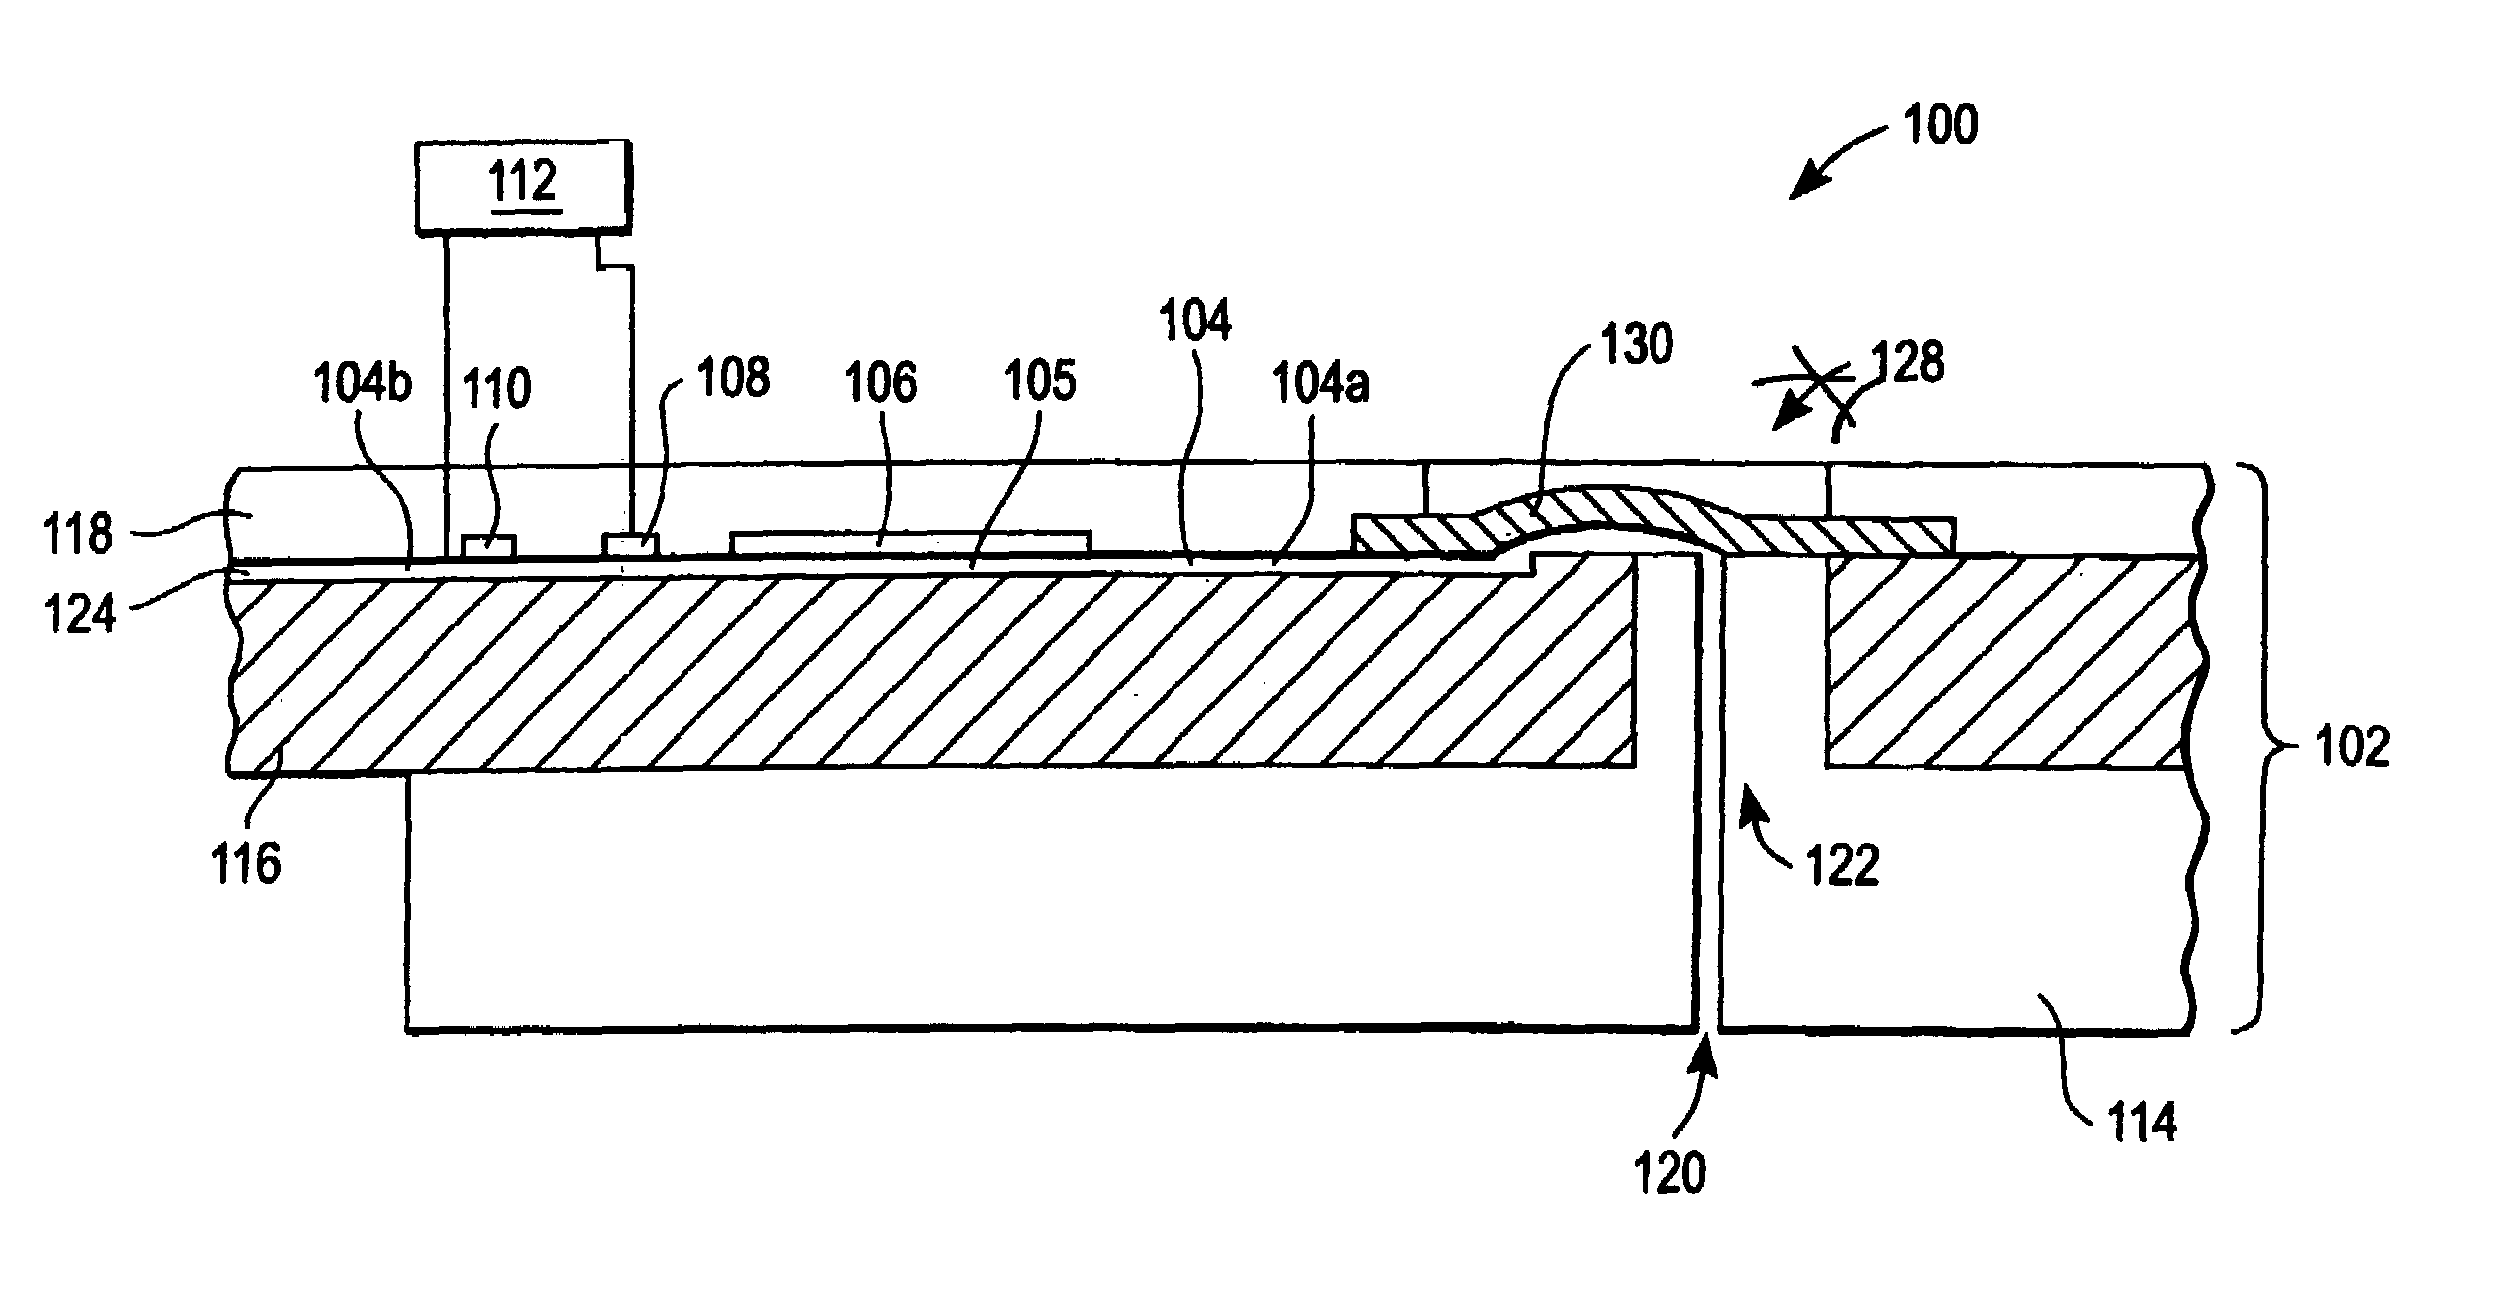 Microfluidic analytical system with position electrodes